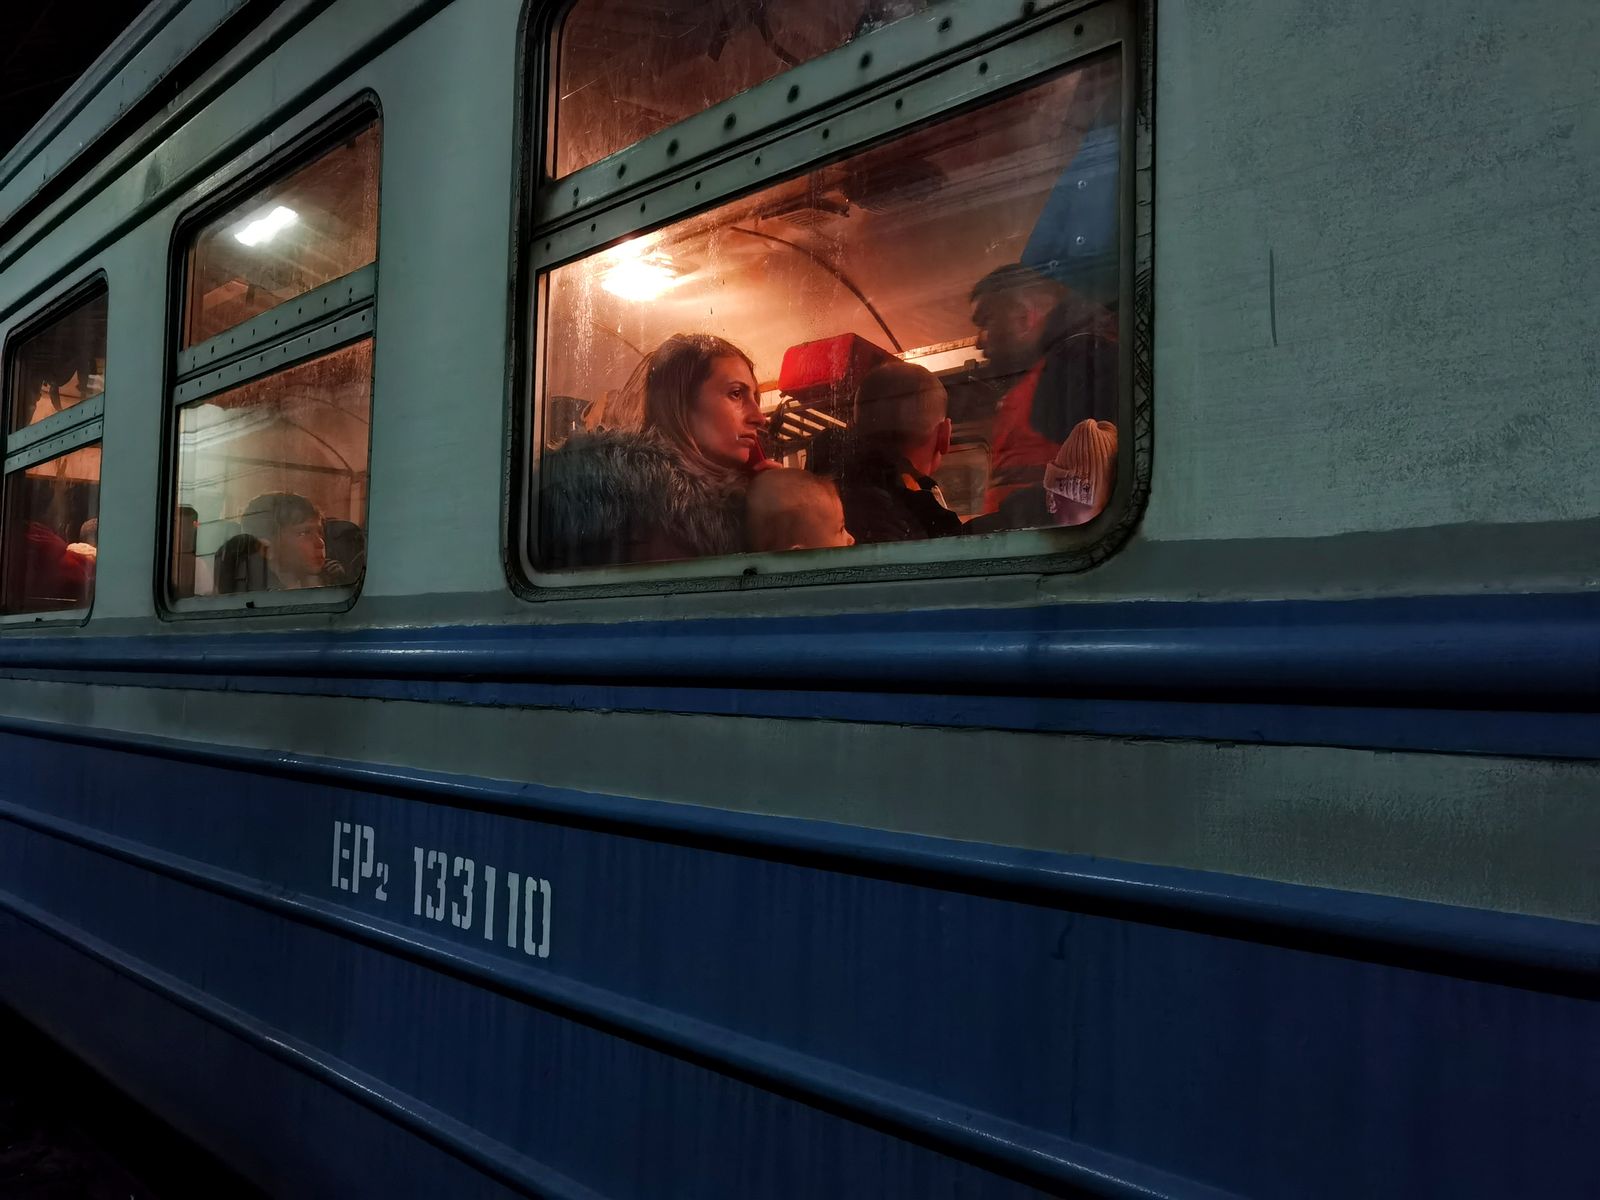 © Mateusz Sarello - Refugee woman with a child from eastern Ukraine in the train waiting at Lviv railway station. Lviv, Ukraine, March 2022